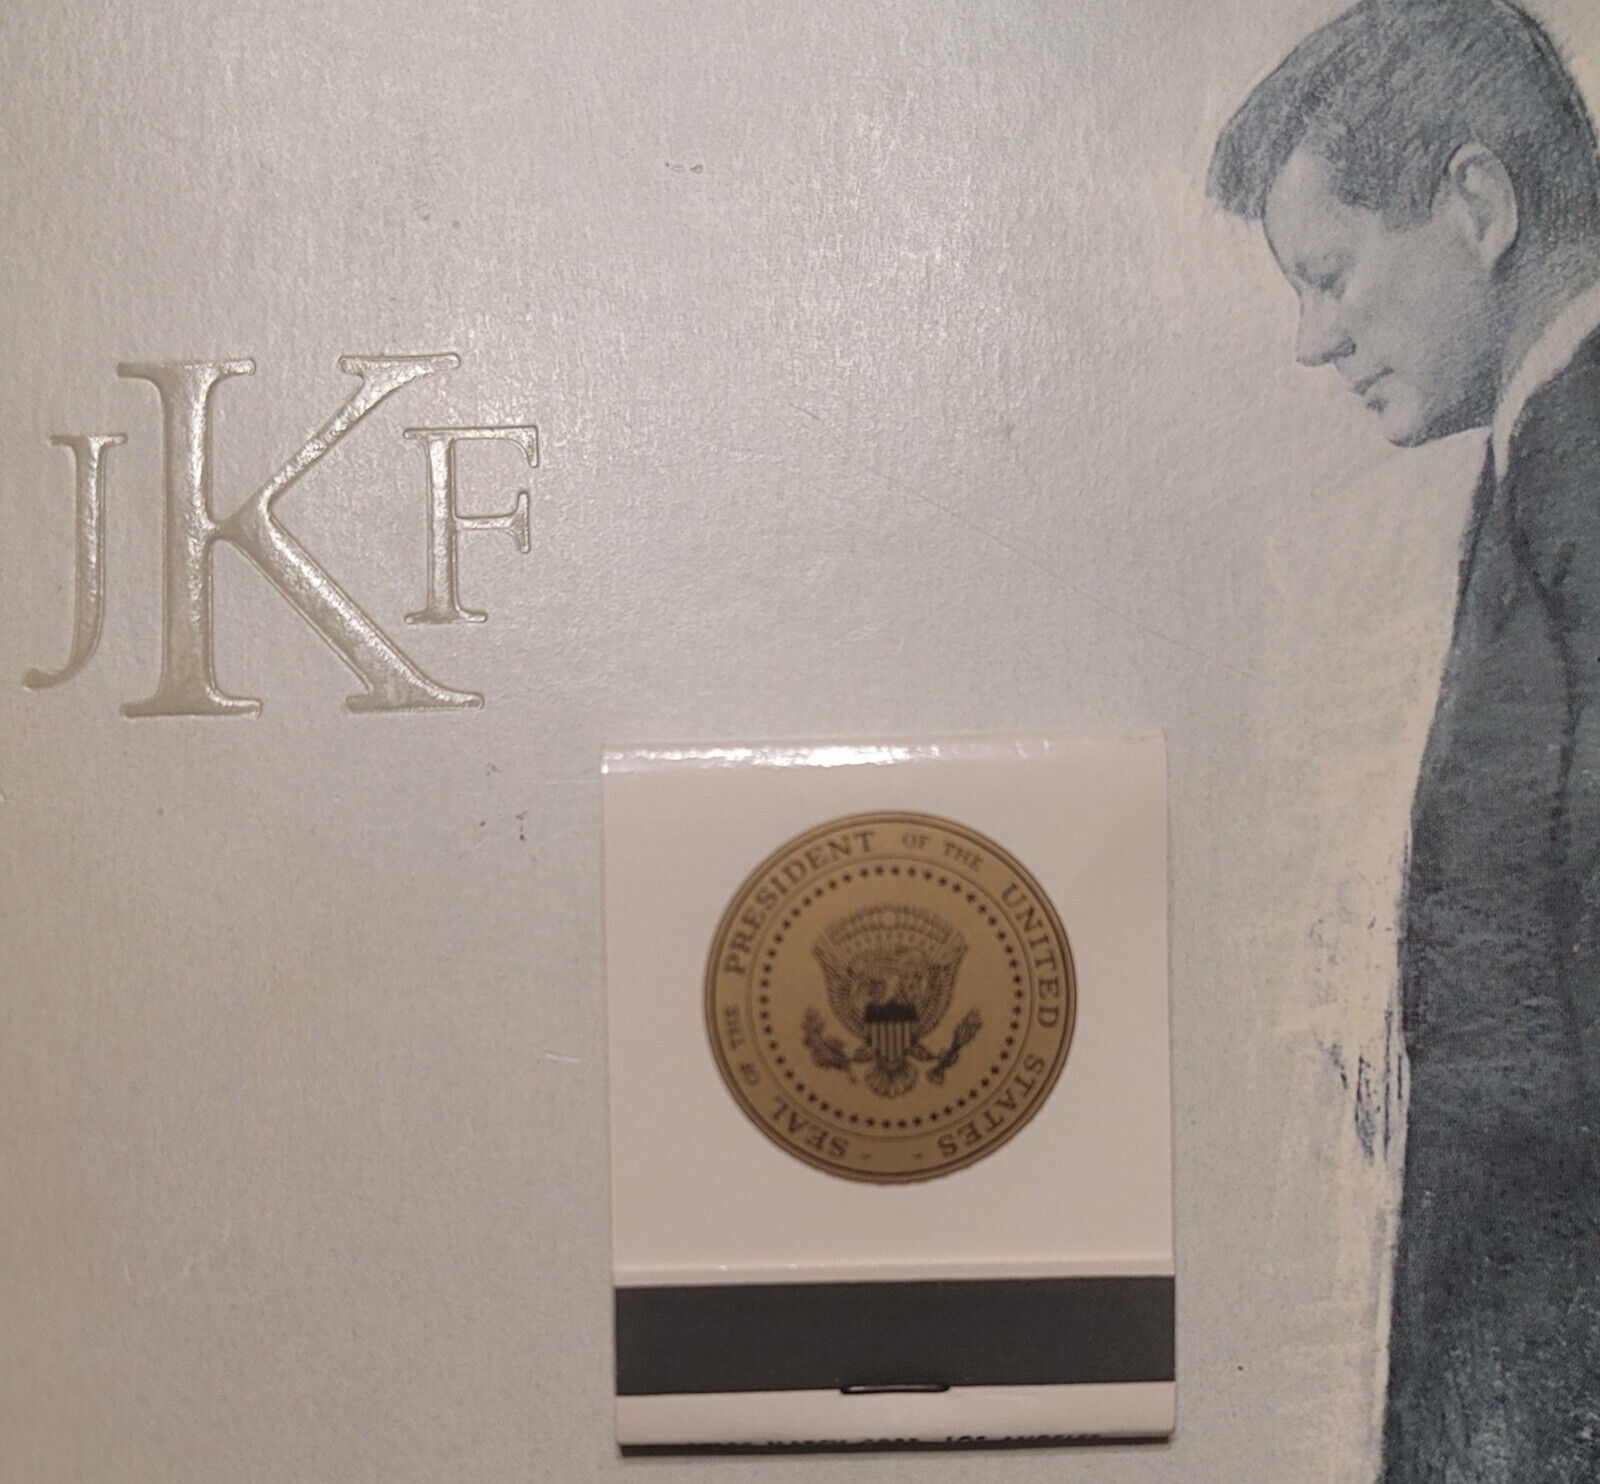 JFK Very Rare Air Force One Matchboook used by President Kennedy